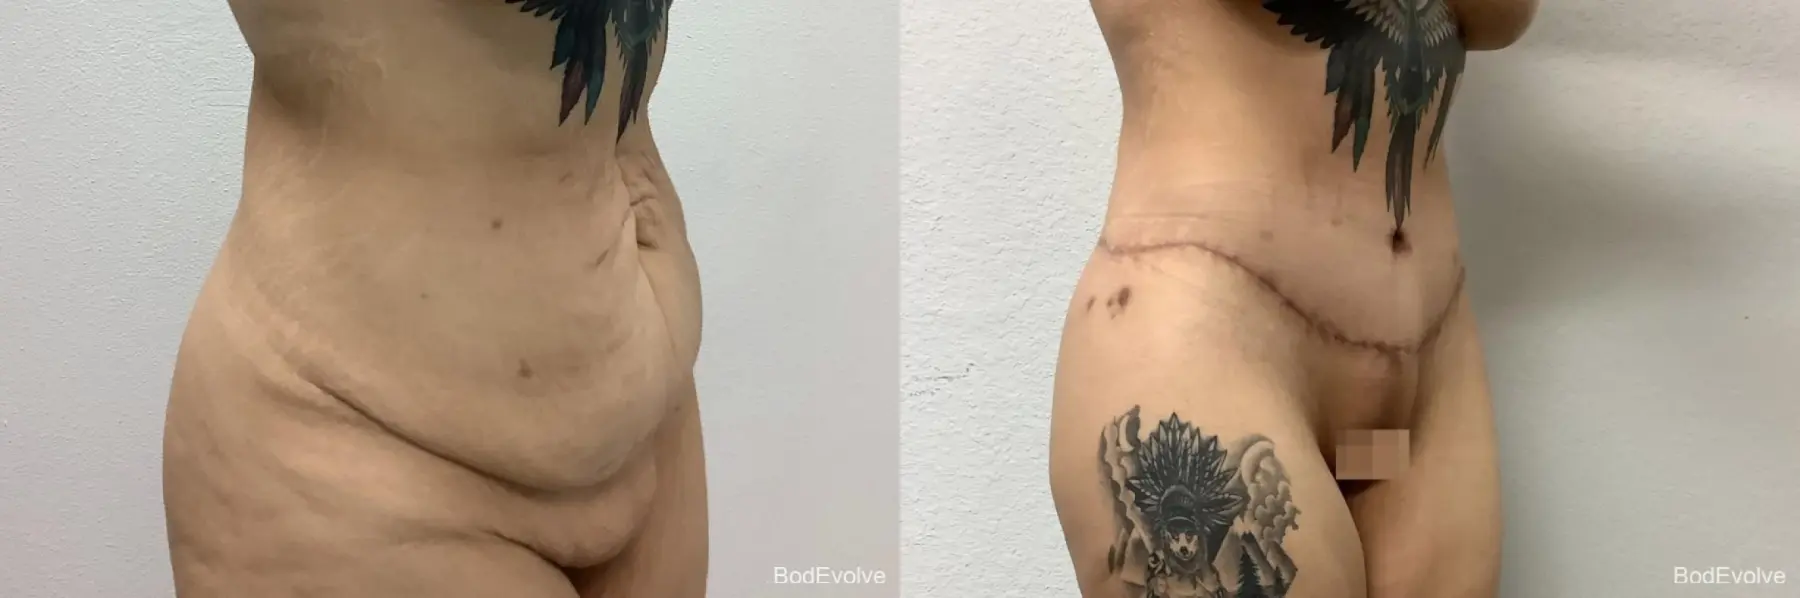 Body Lift: Patient 3 - Before and After 5